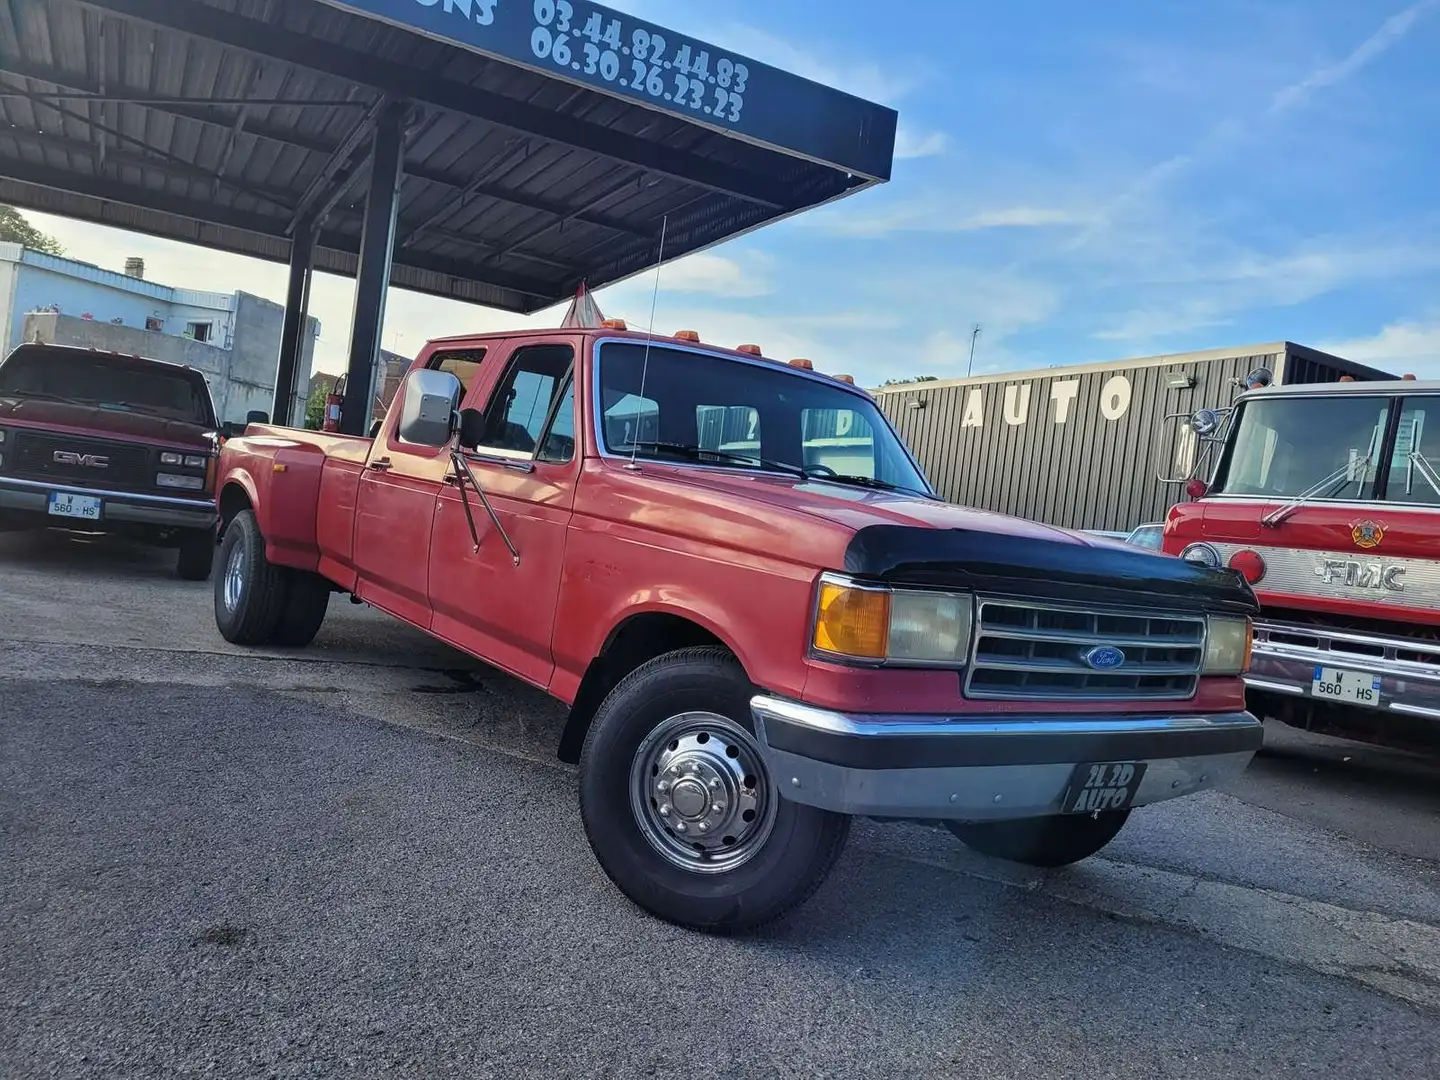 Ford F 350 FORD F350 CREW CAB 7.3 V8 Diesel dually Red - 2